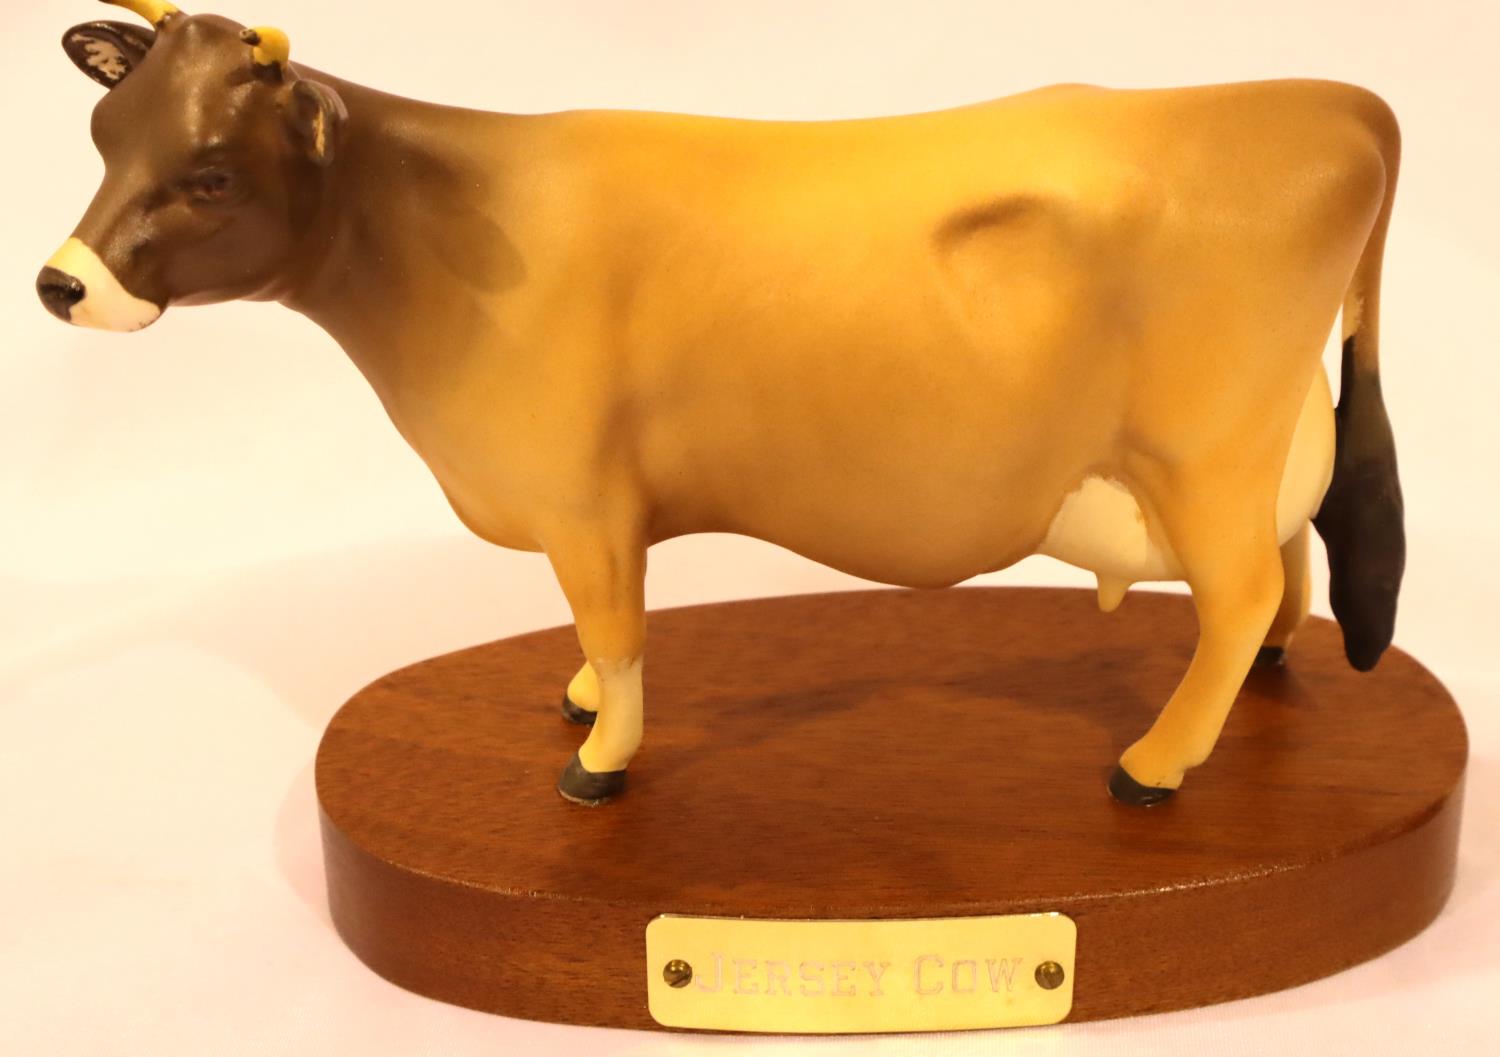 Boxed matt Beswick Jersey cow on wooden plinth, L: 16 cm, no cracks, chips or visible restoration.